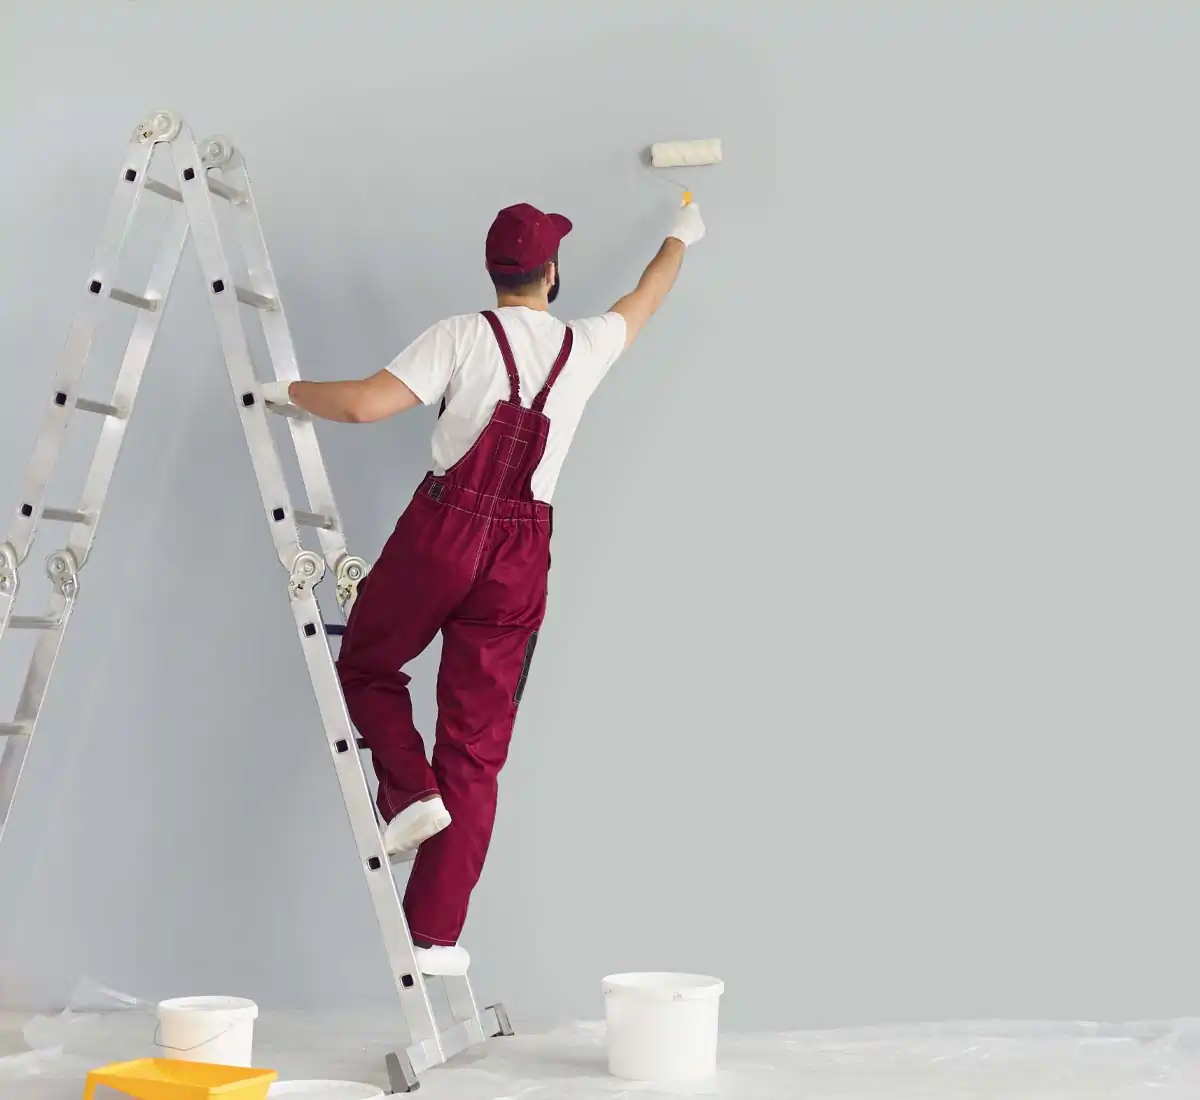 Contractor on a ladder painting wall.